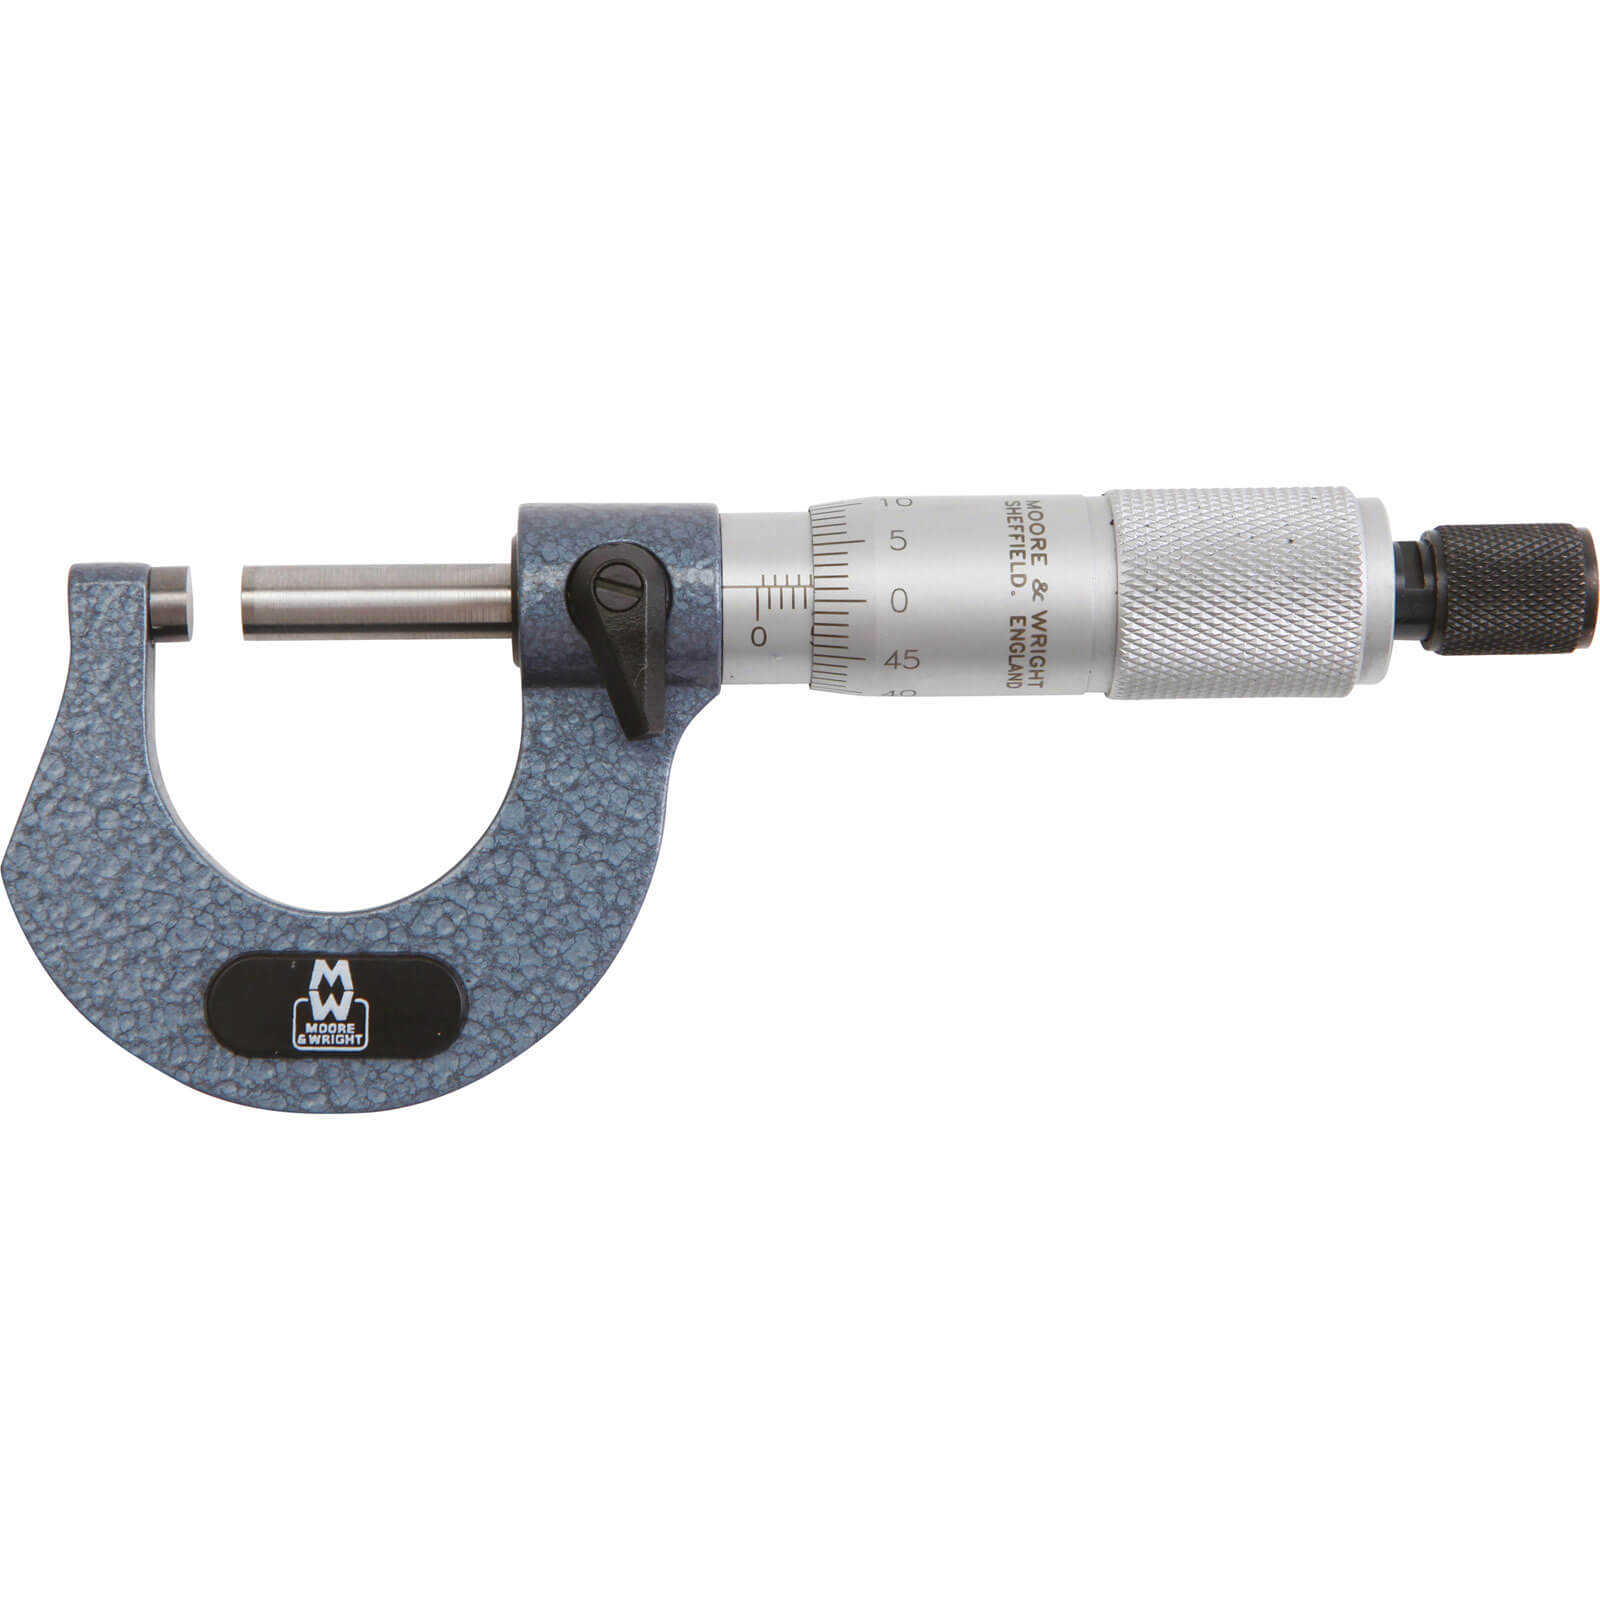 Moore and Wright 1965 External Micrometer 0-1